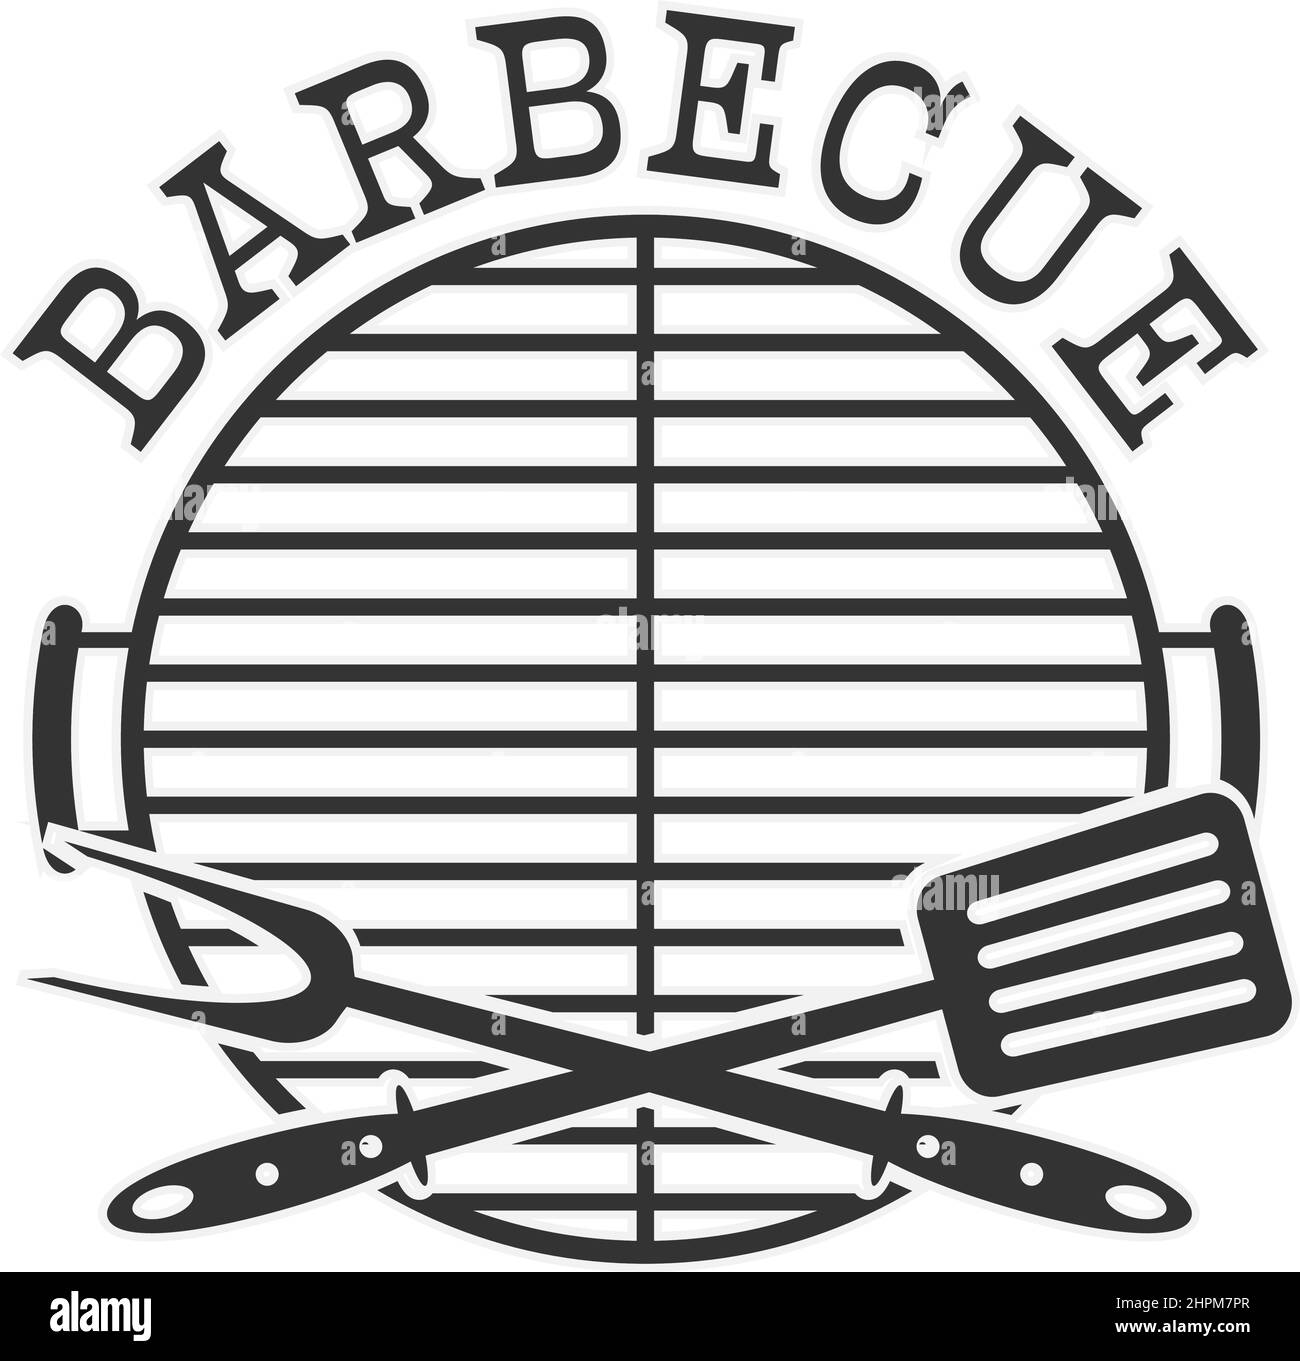 round barbecue BBQ sticker with grill grate, fork and spatula, vector illustration Stock Vector